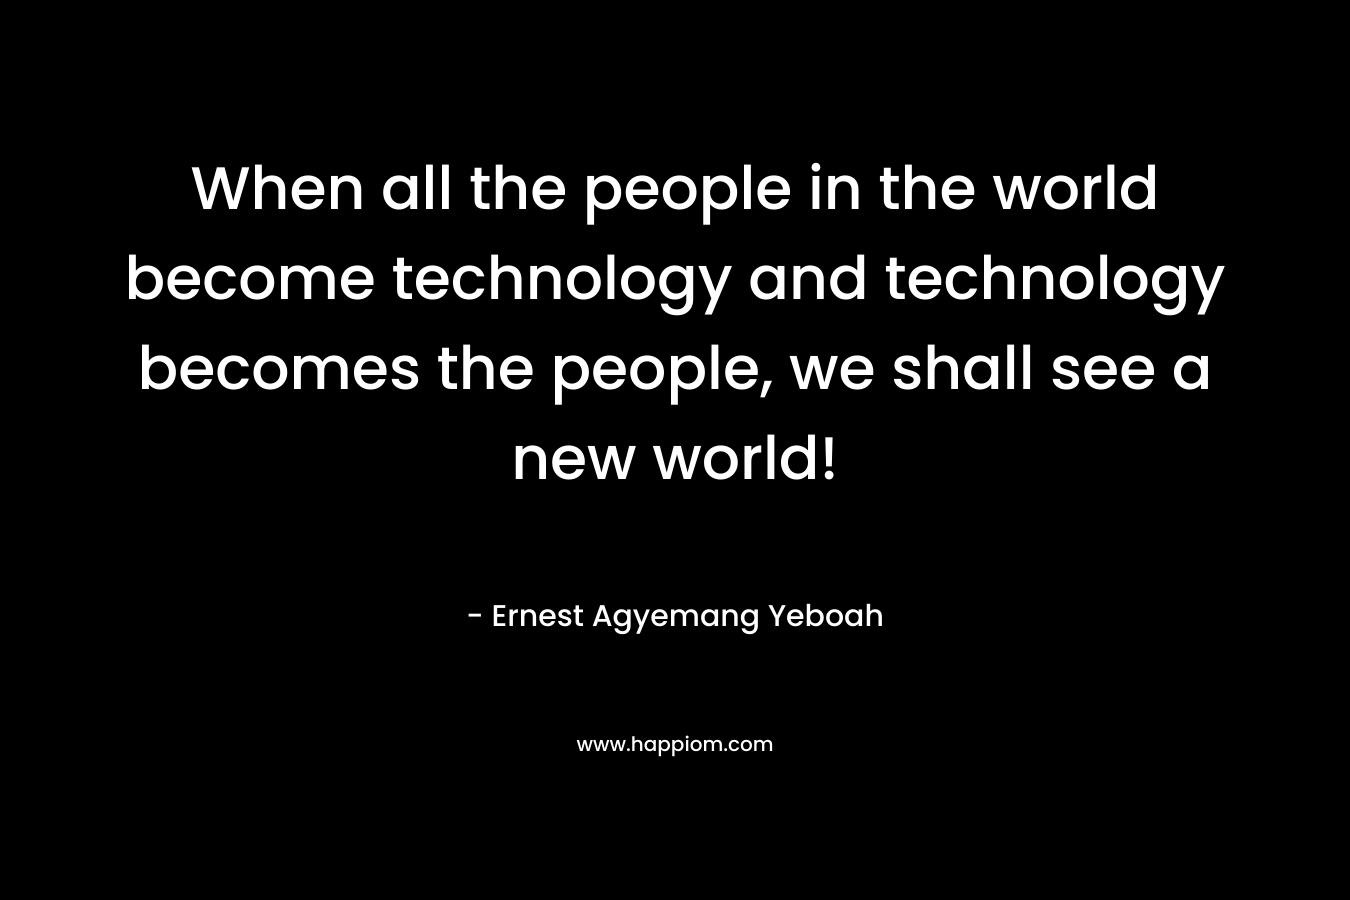 When all the people in the world become technology and technology becomes the people, we shall see a new world!